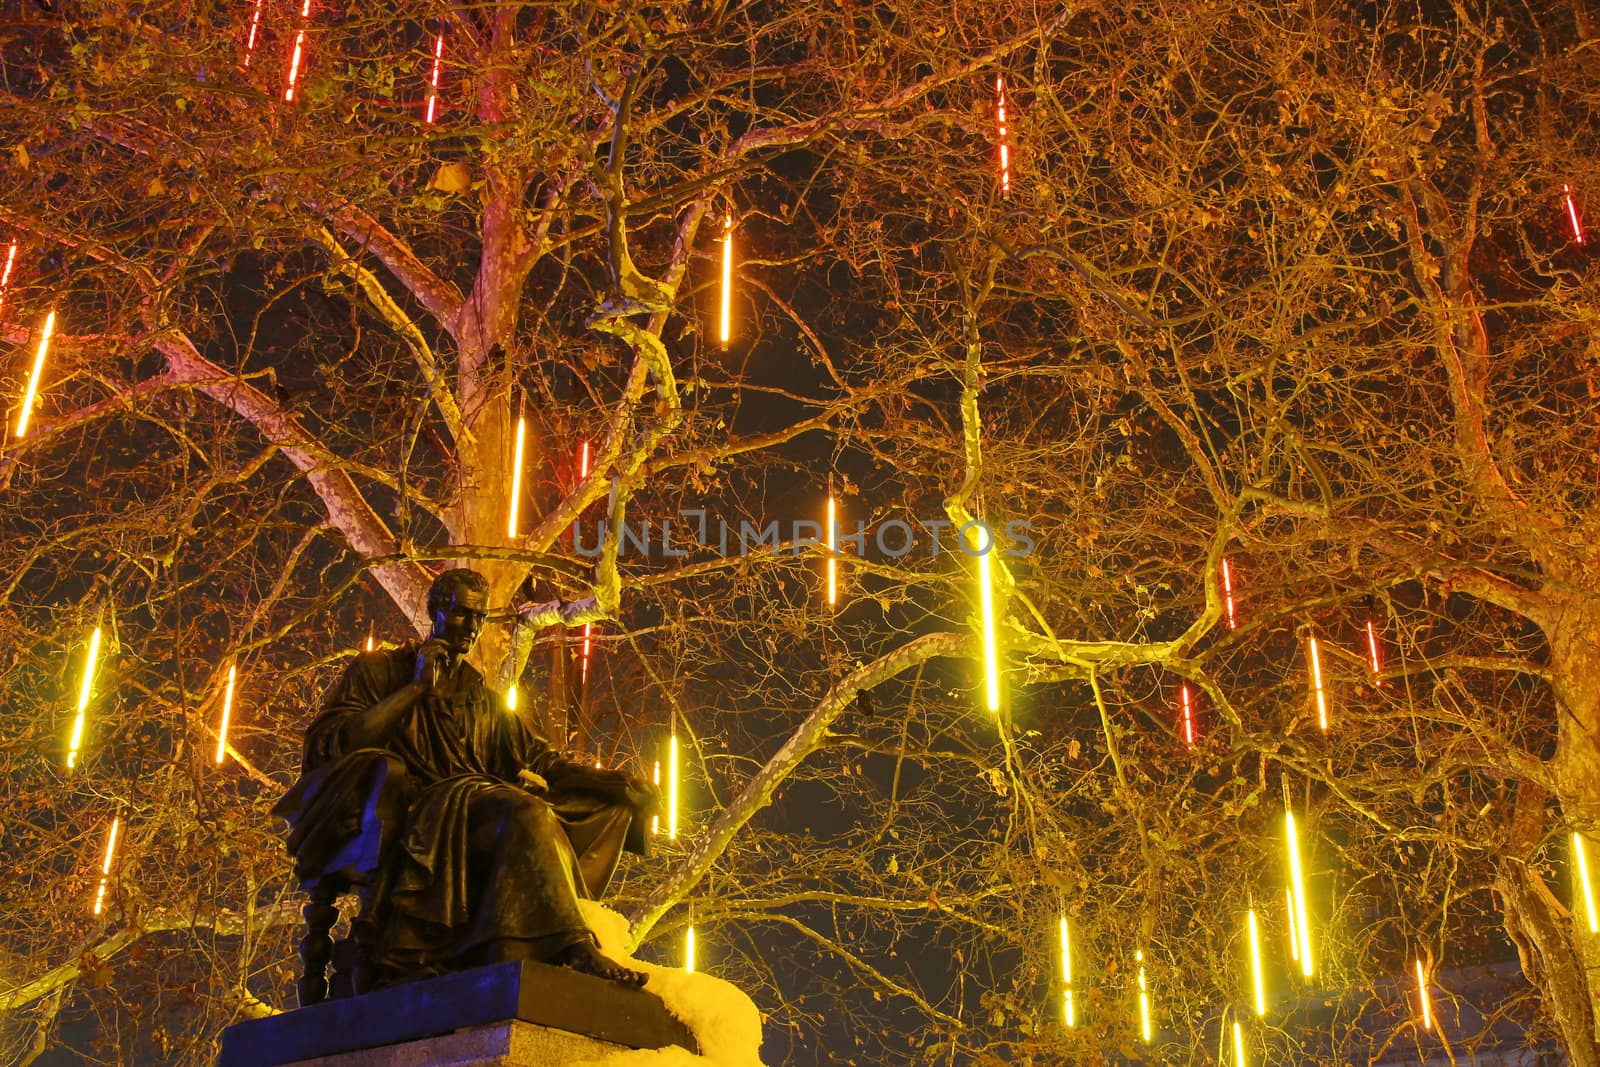 GENEVA, SWITZERLAND - DECEMBER 2 : festival of lights on a tree in front of Jean-Jacques Rousseau statue, on December 2, 2010, in Geneva, Switzerland.